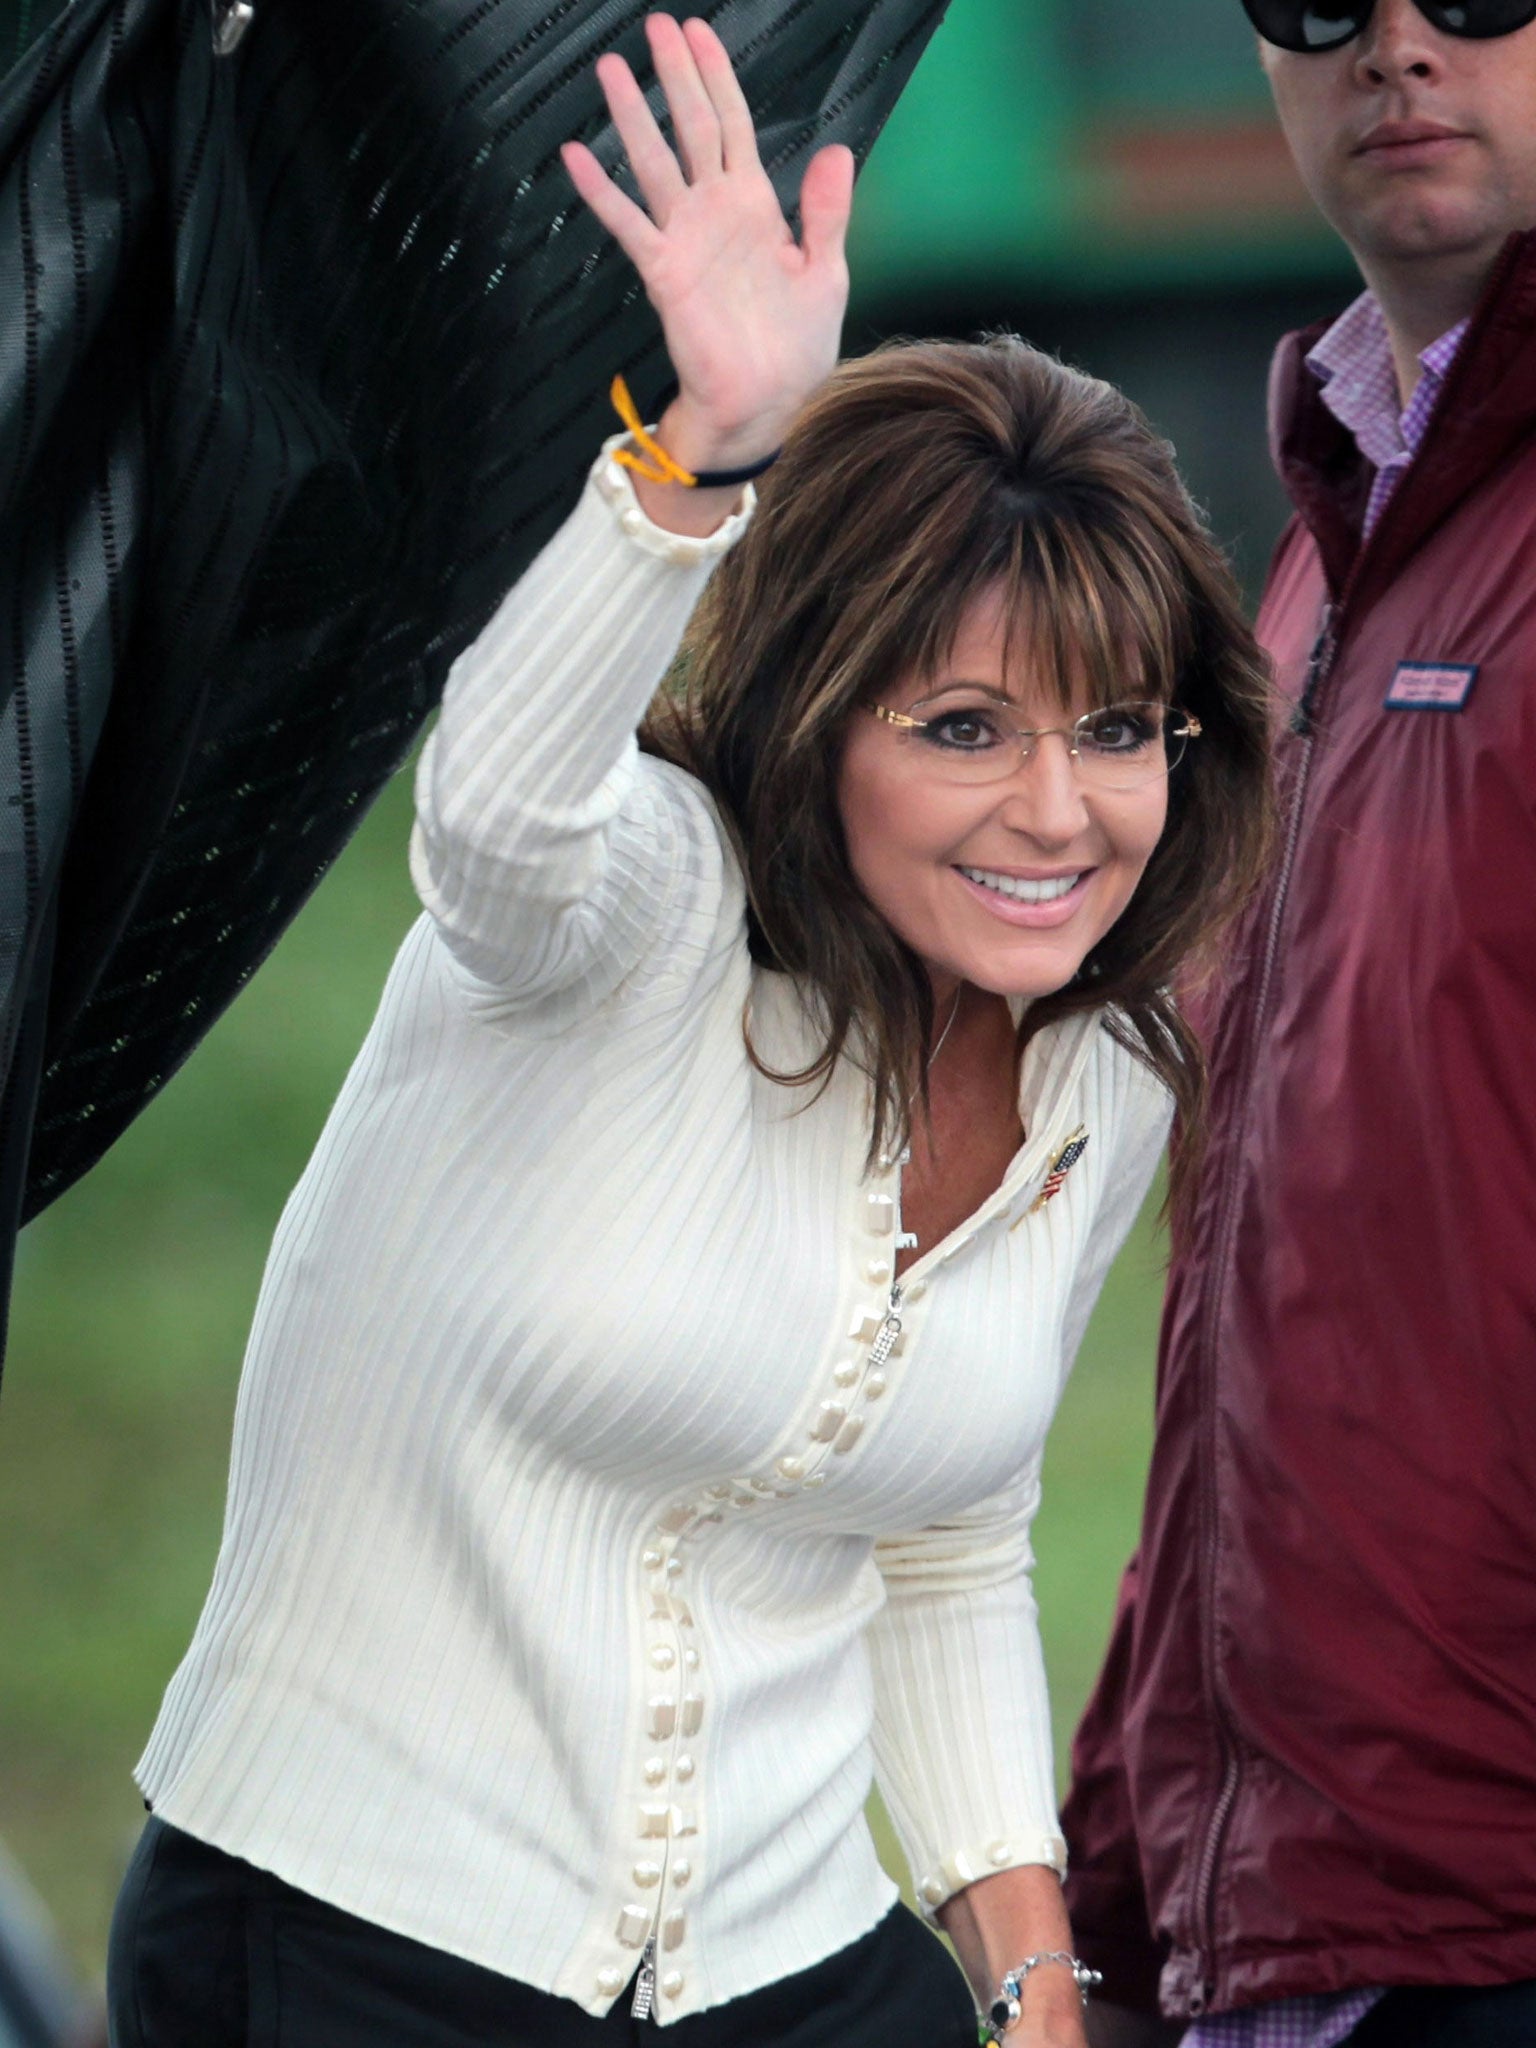 Sarah Palin, pictured here in 2011